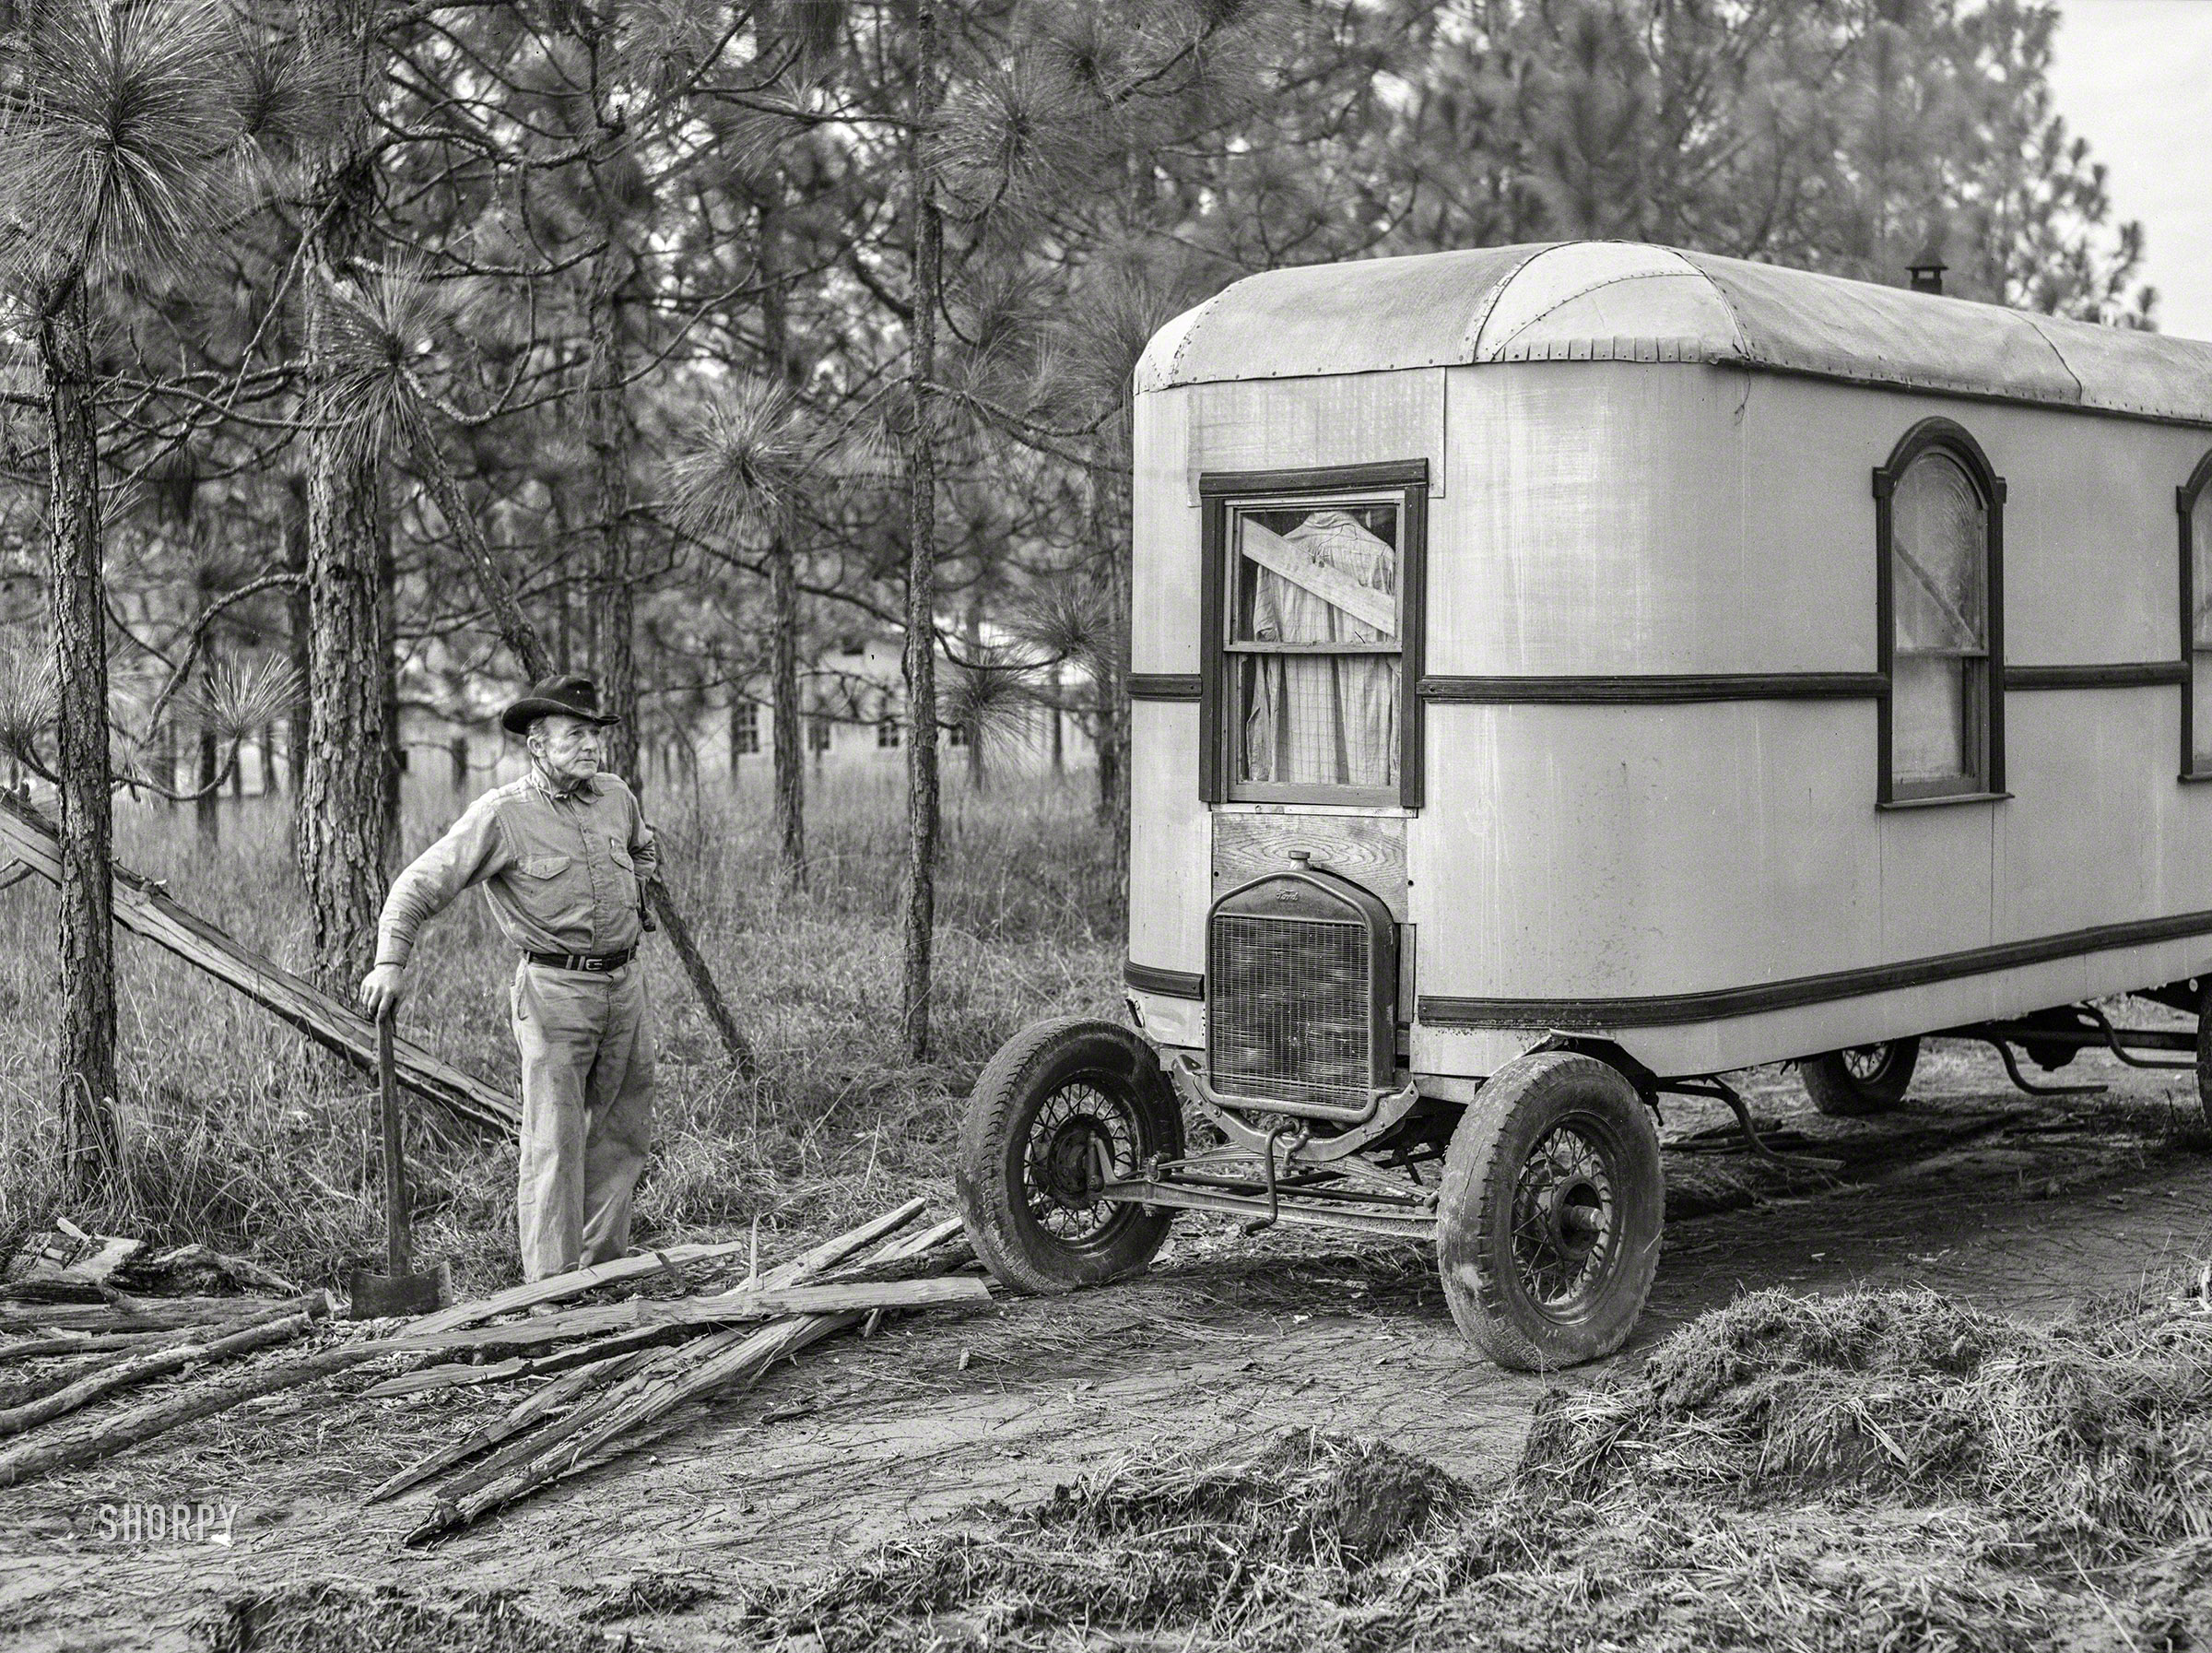 December 1940. Alexandria, Louisiana. "Construction worker's trailer (home-made house car). He has a job at Camp Livingston." Acetate negative by Marion Post Wolcott. View full size.